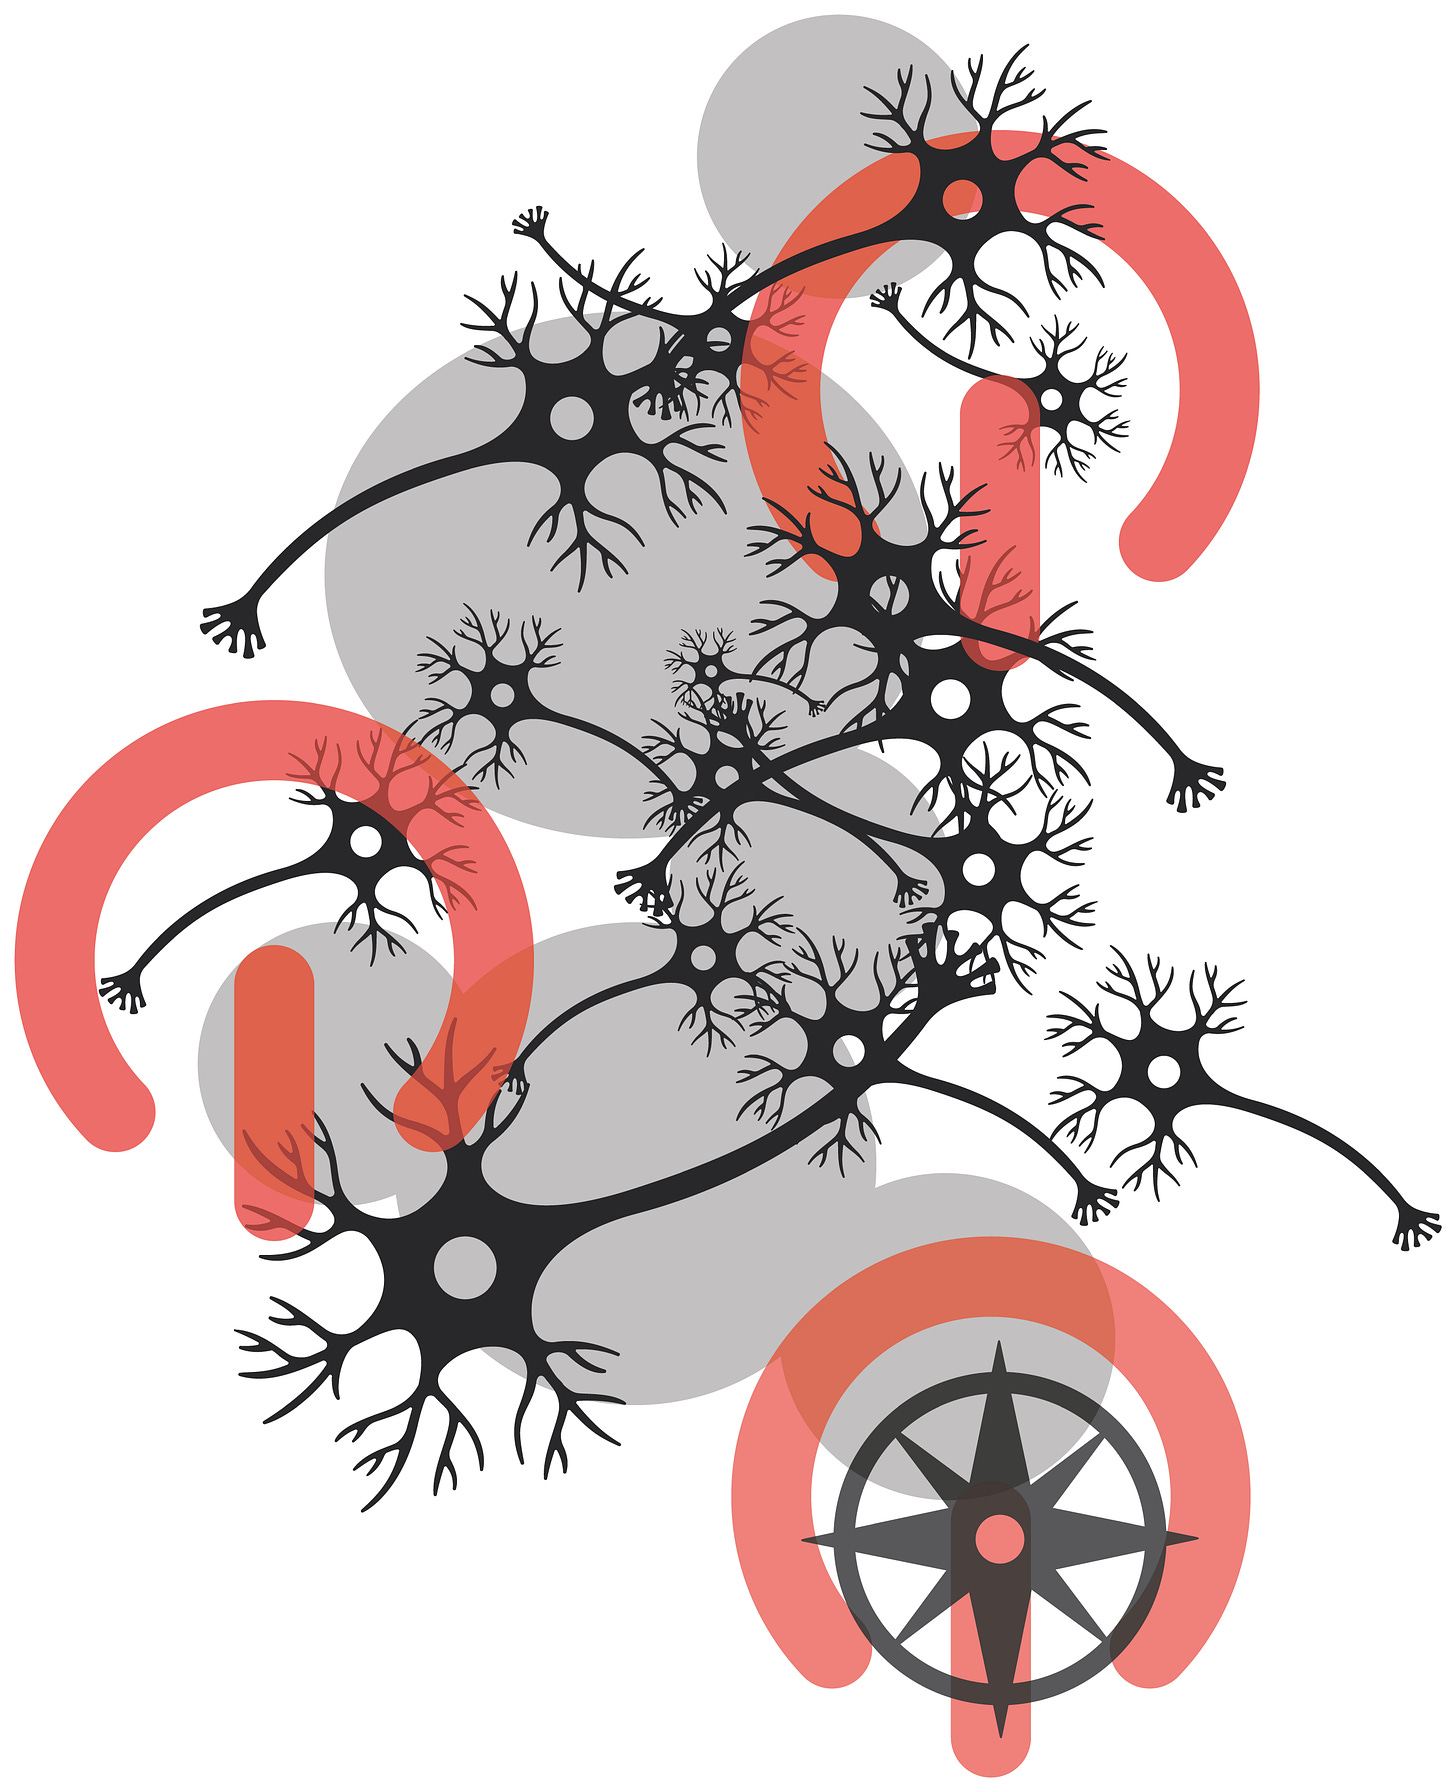 an image poem without words, consisting of a stack of superimposed gray circles, some touching & some not, overlaid with a number of neurons in black. three “partial circle enclosing a vertical line” power icons for electronic devices float in transparent red at the top right, middle left and bottom right of the image. inside the lower red icon, a dark gray compass rose is enclosed.